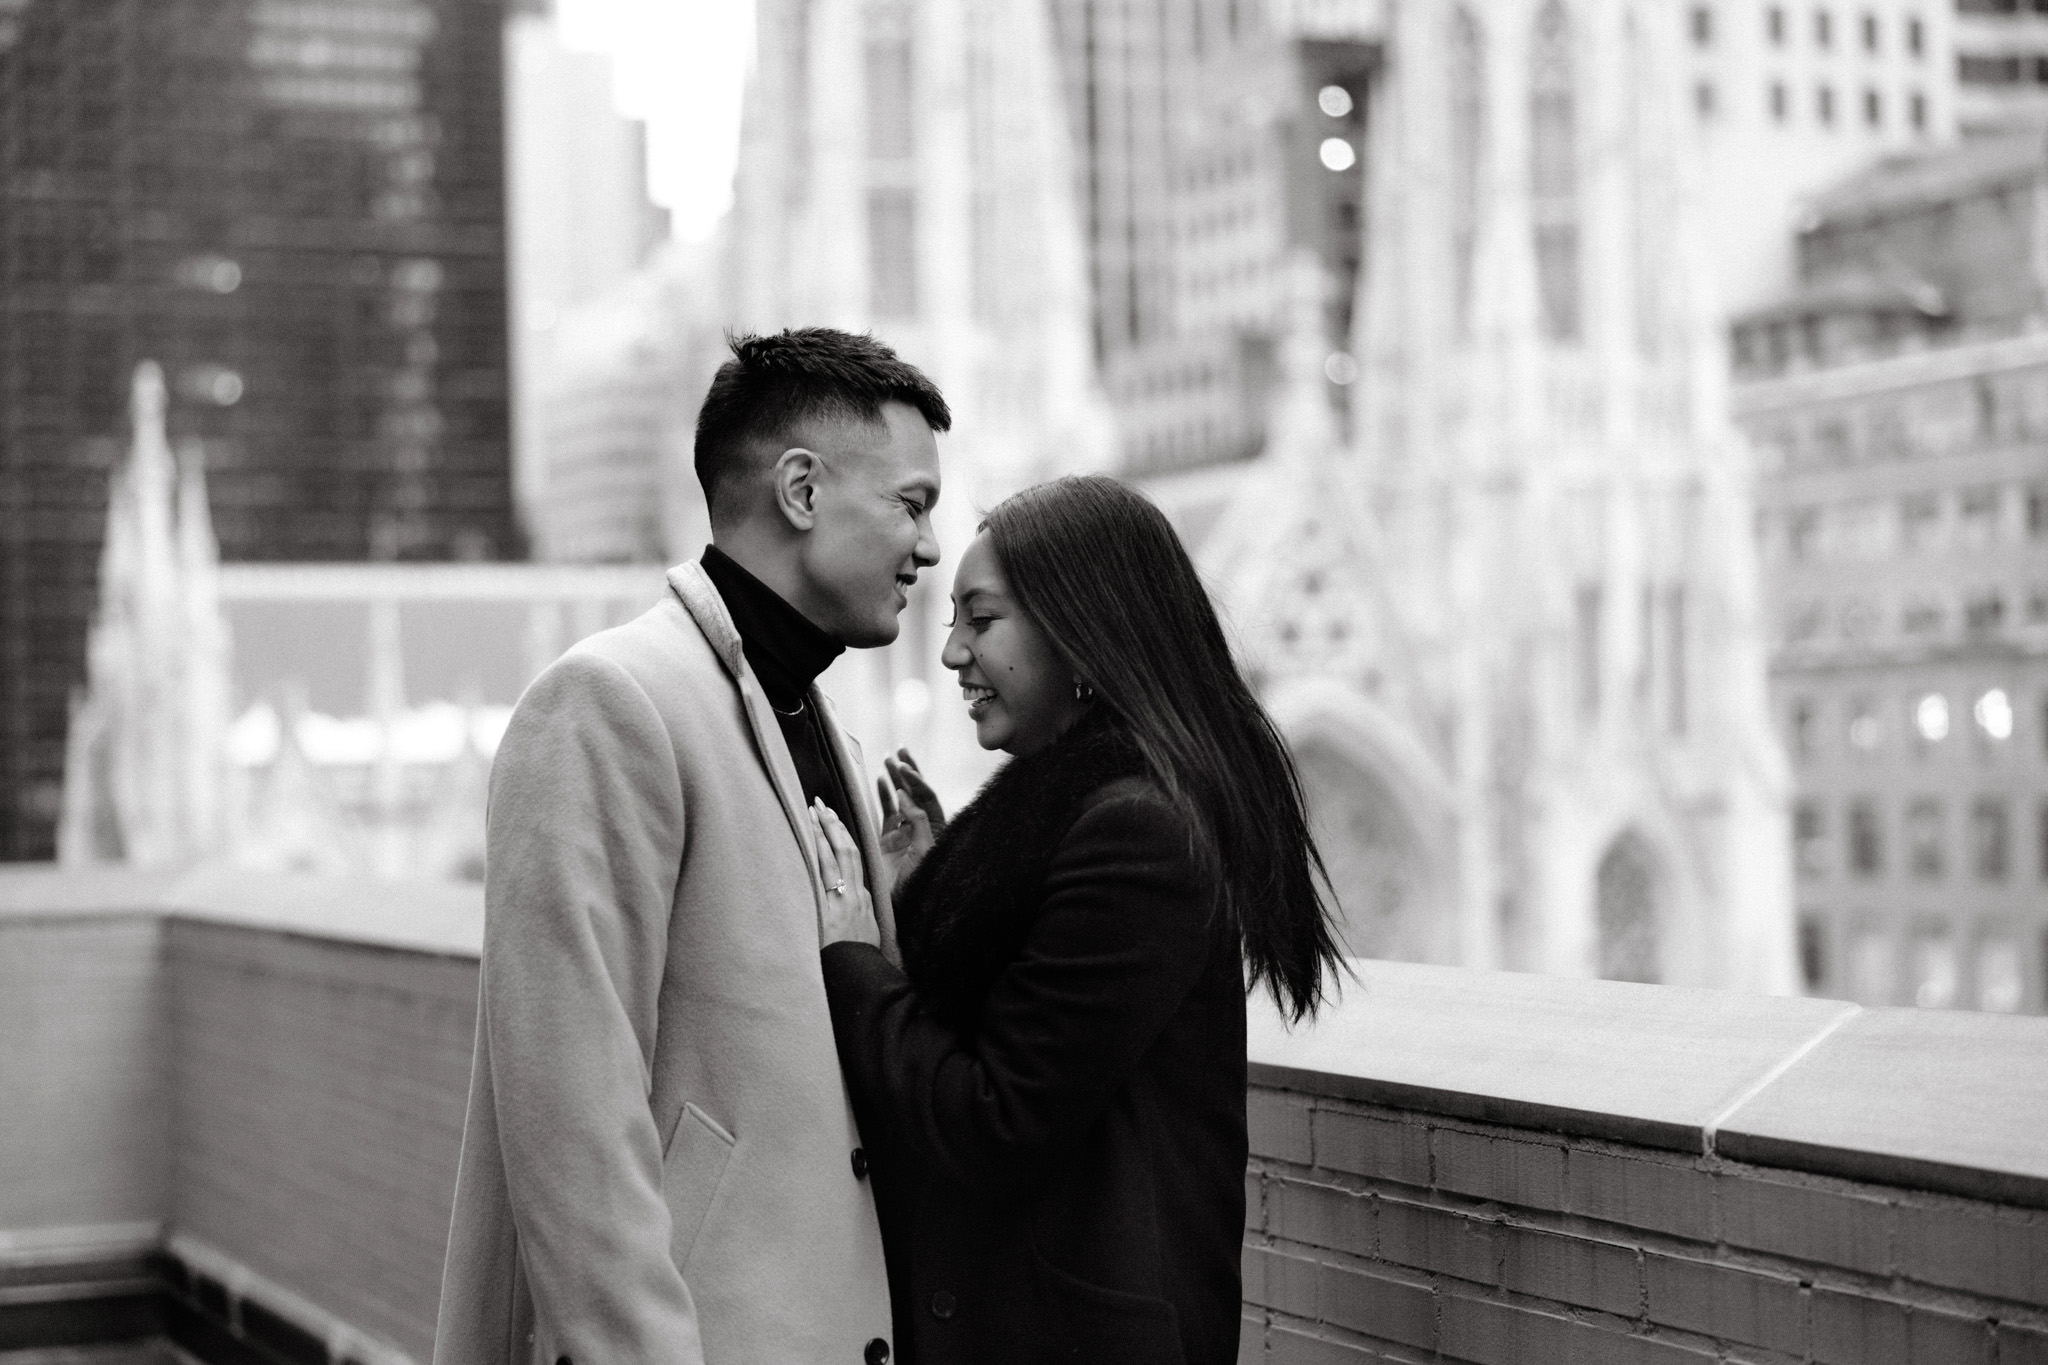 Editorial image of the happy newly-engaged couple with St. Patrick's Cathedral in the background. Proposal in NYC image by Jenny Fu Studio